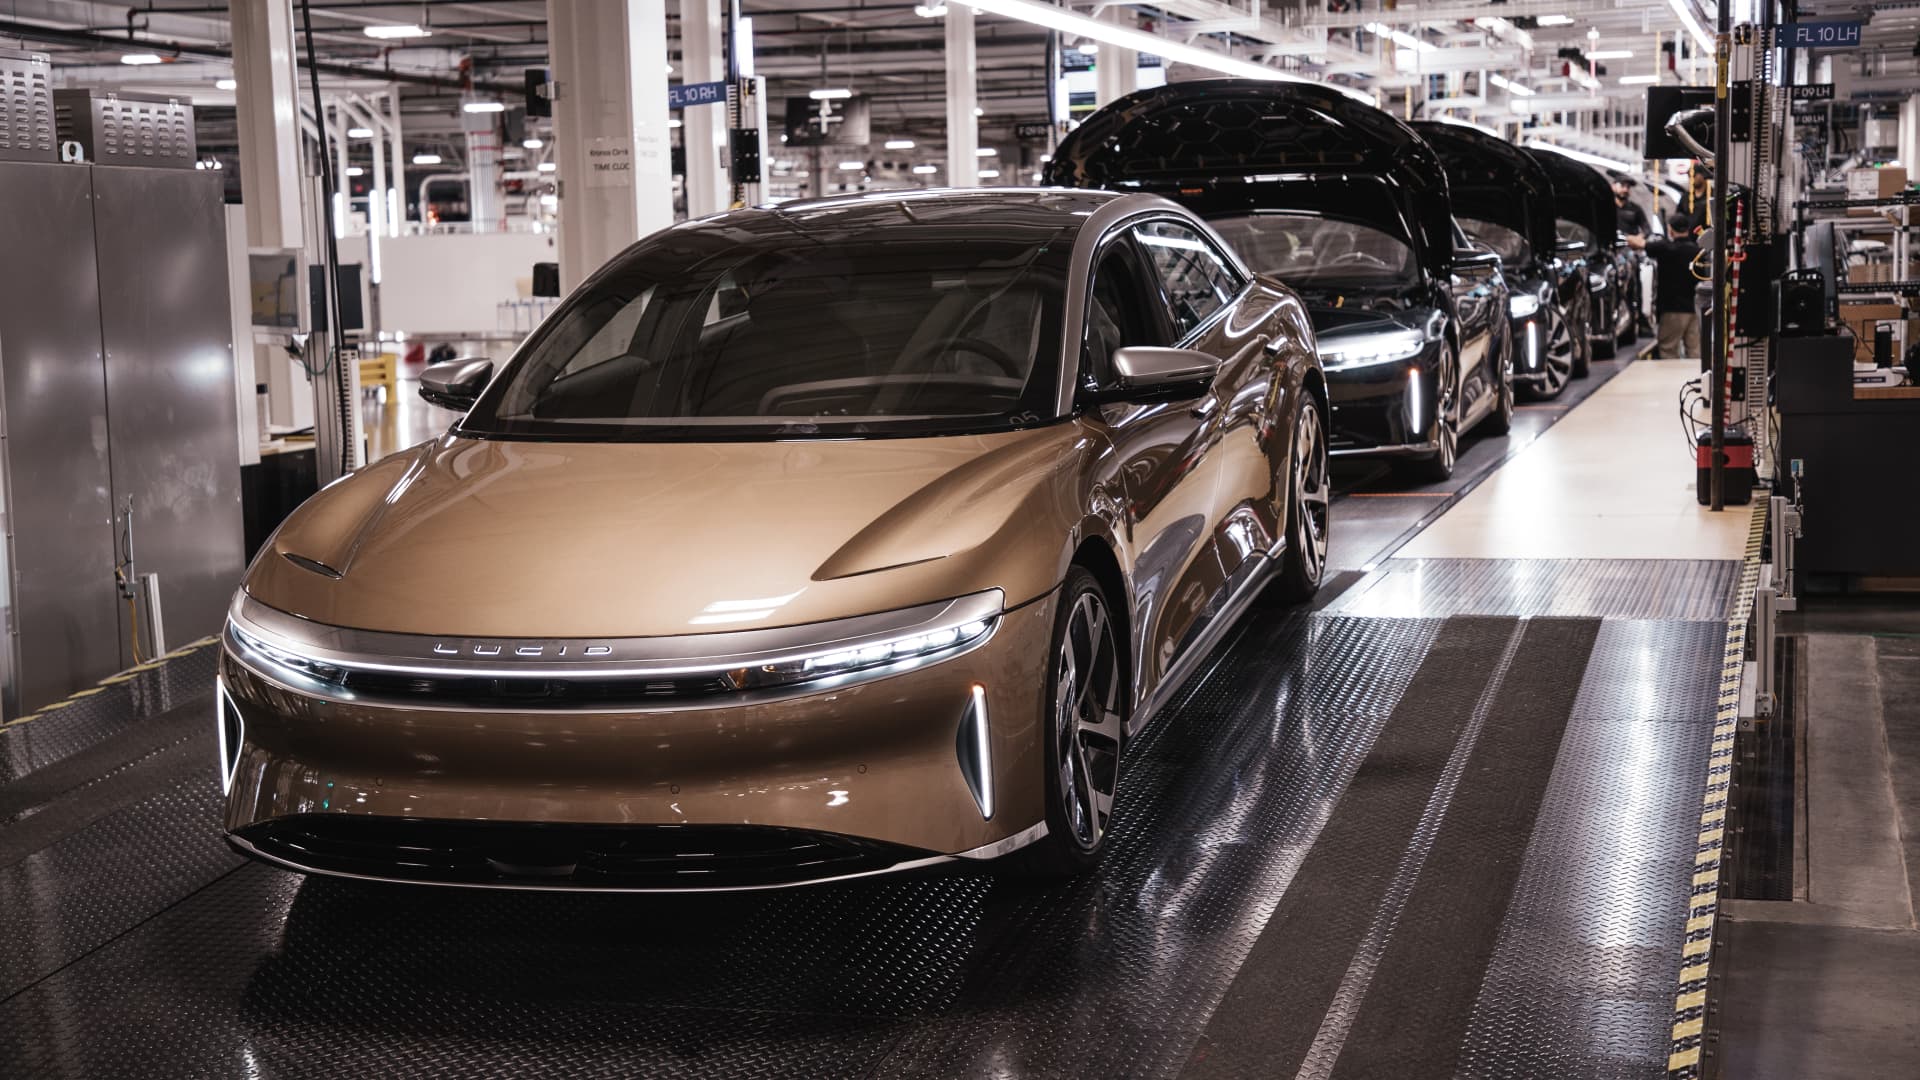 Electric vehicle start-up Lucid on Sept. 28, 2021 said production of its first cars for customers has started at its factory in in Casa Grande, Arizona.